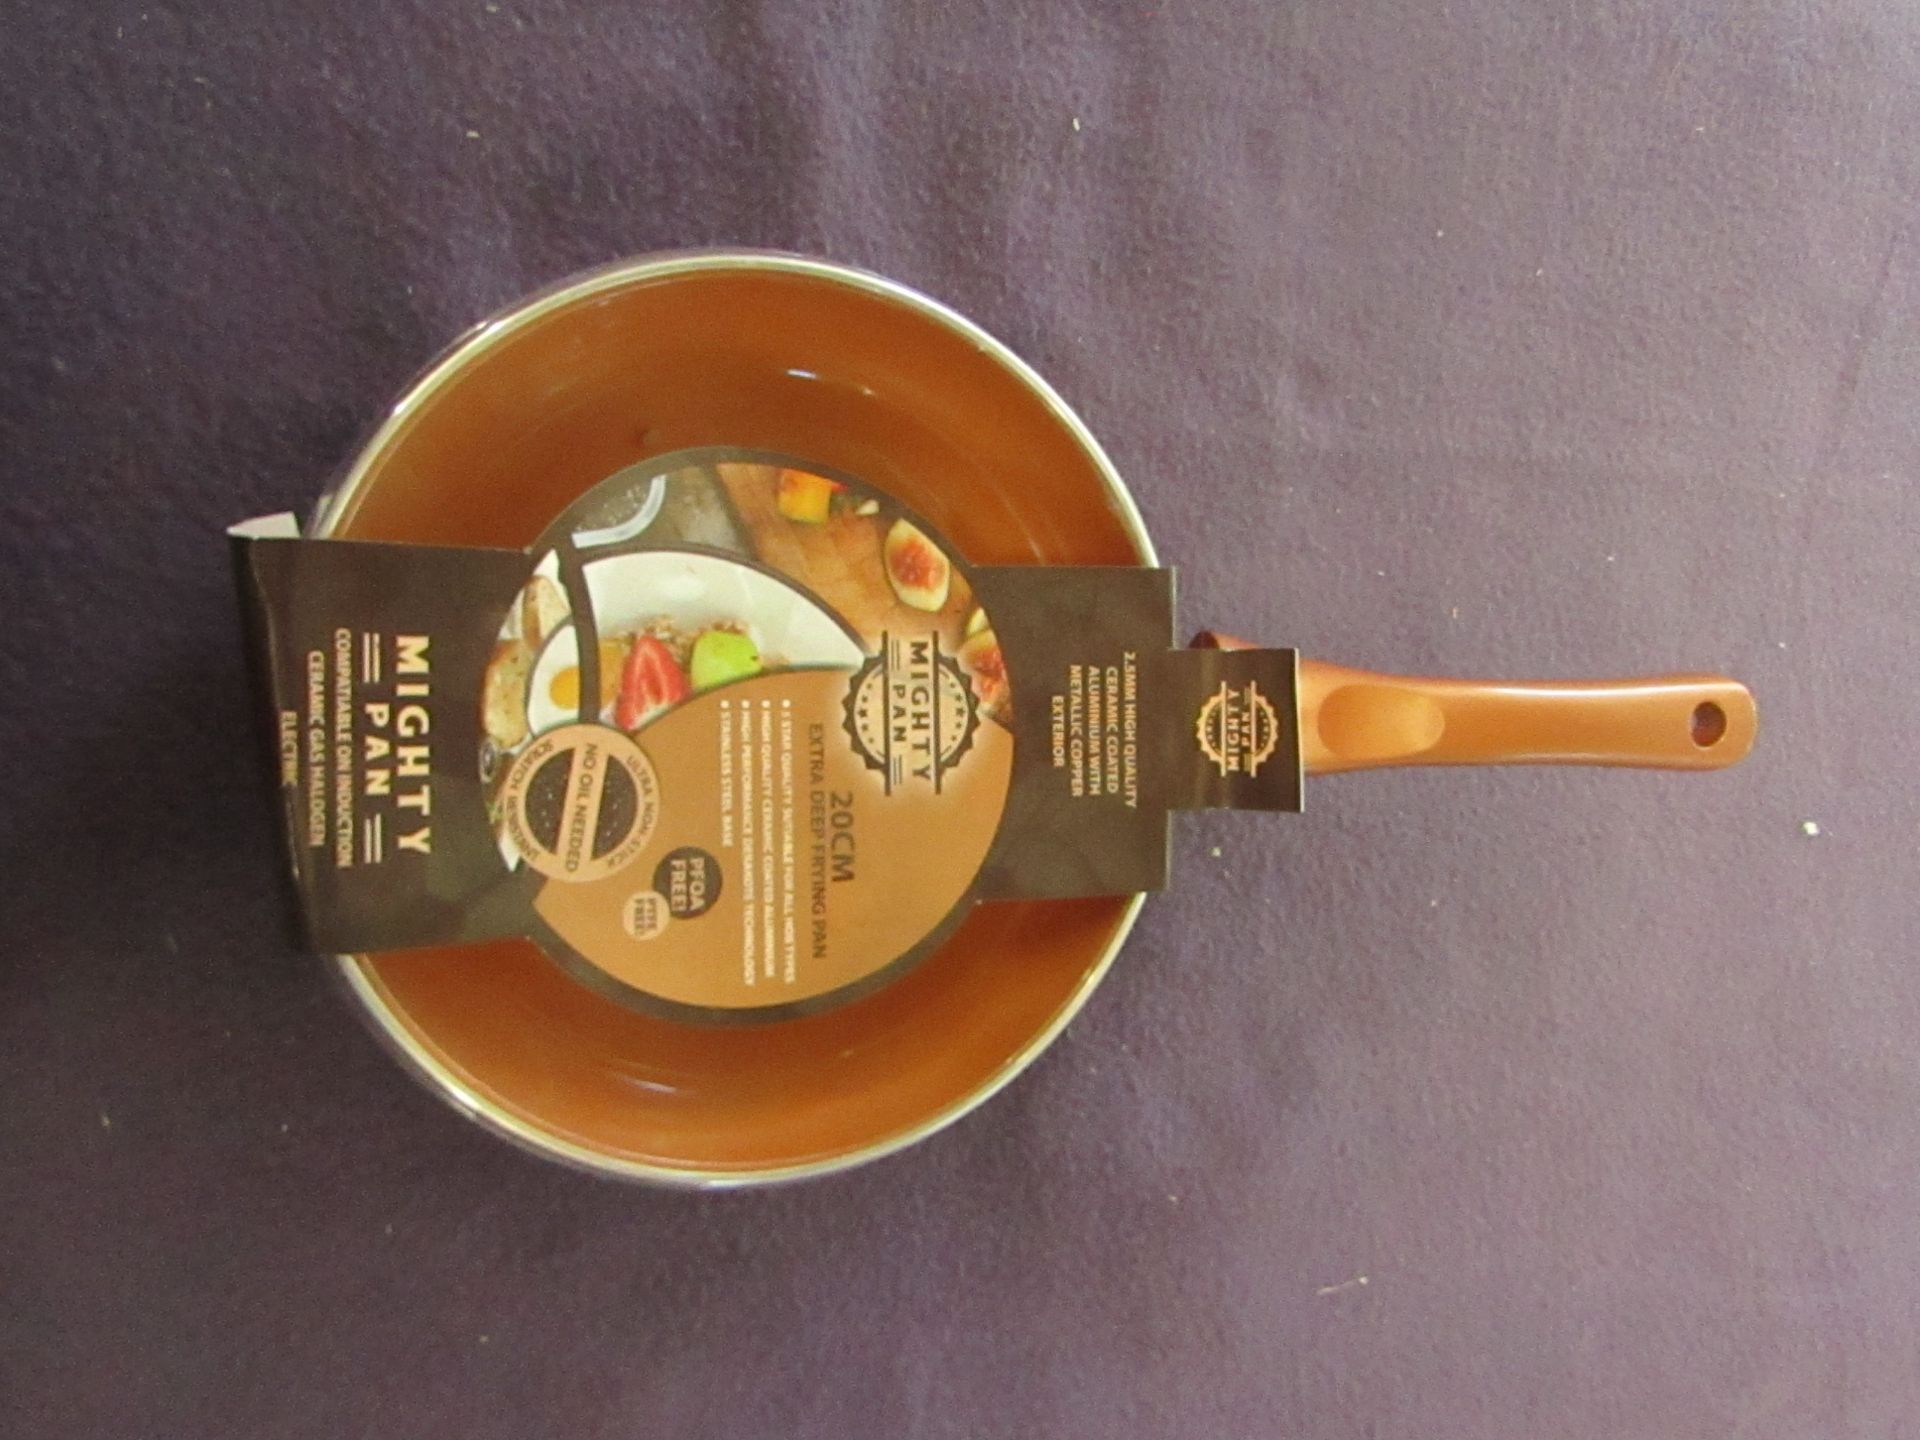 Mighty Pan - 20cm Copper Frying Pan - New & Boxed.